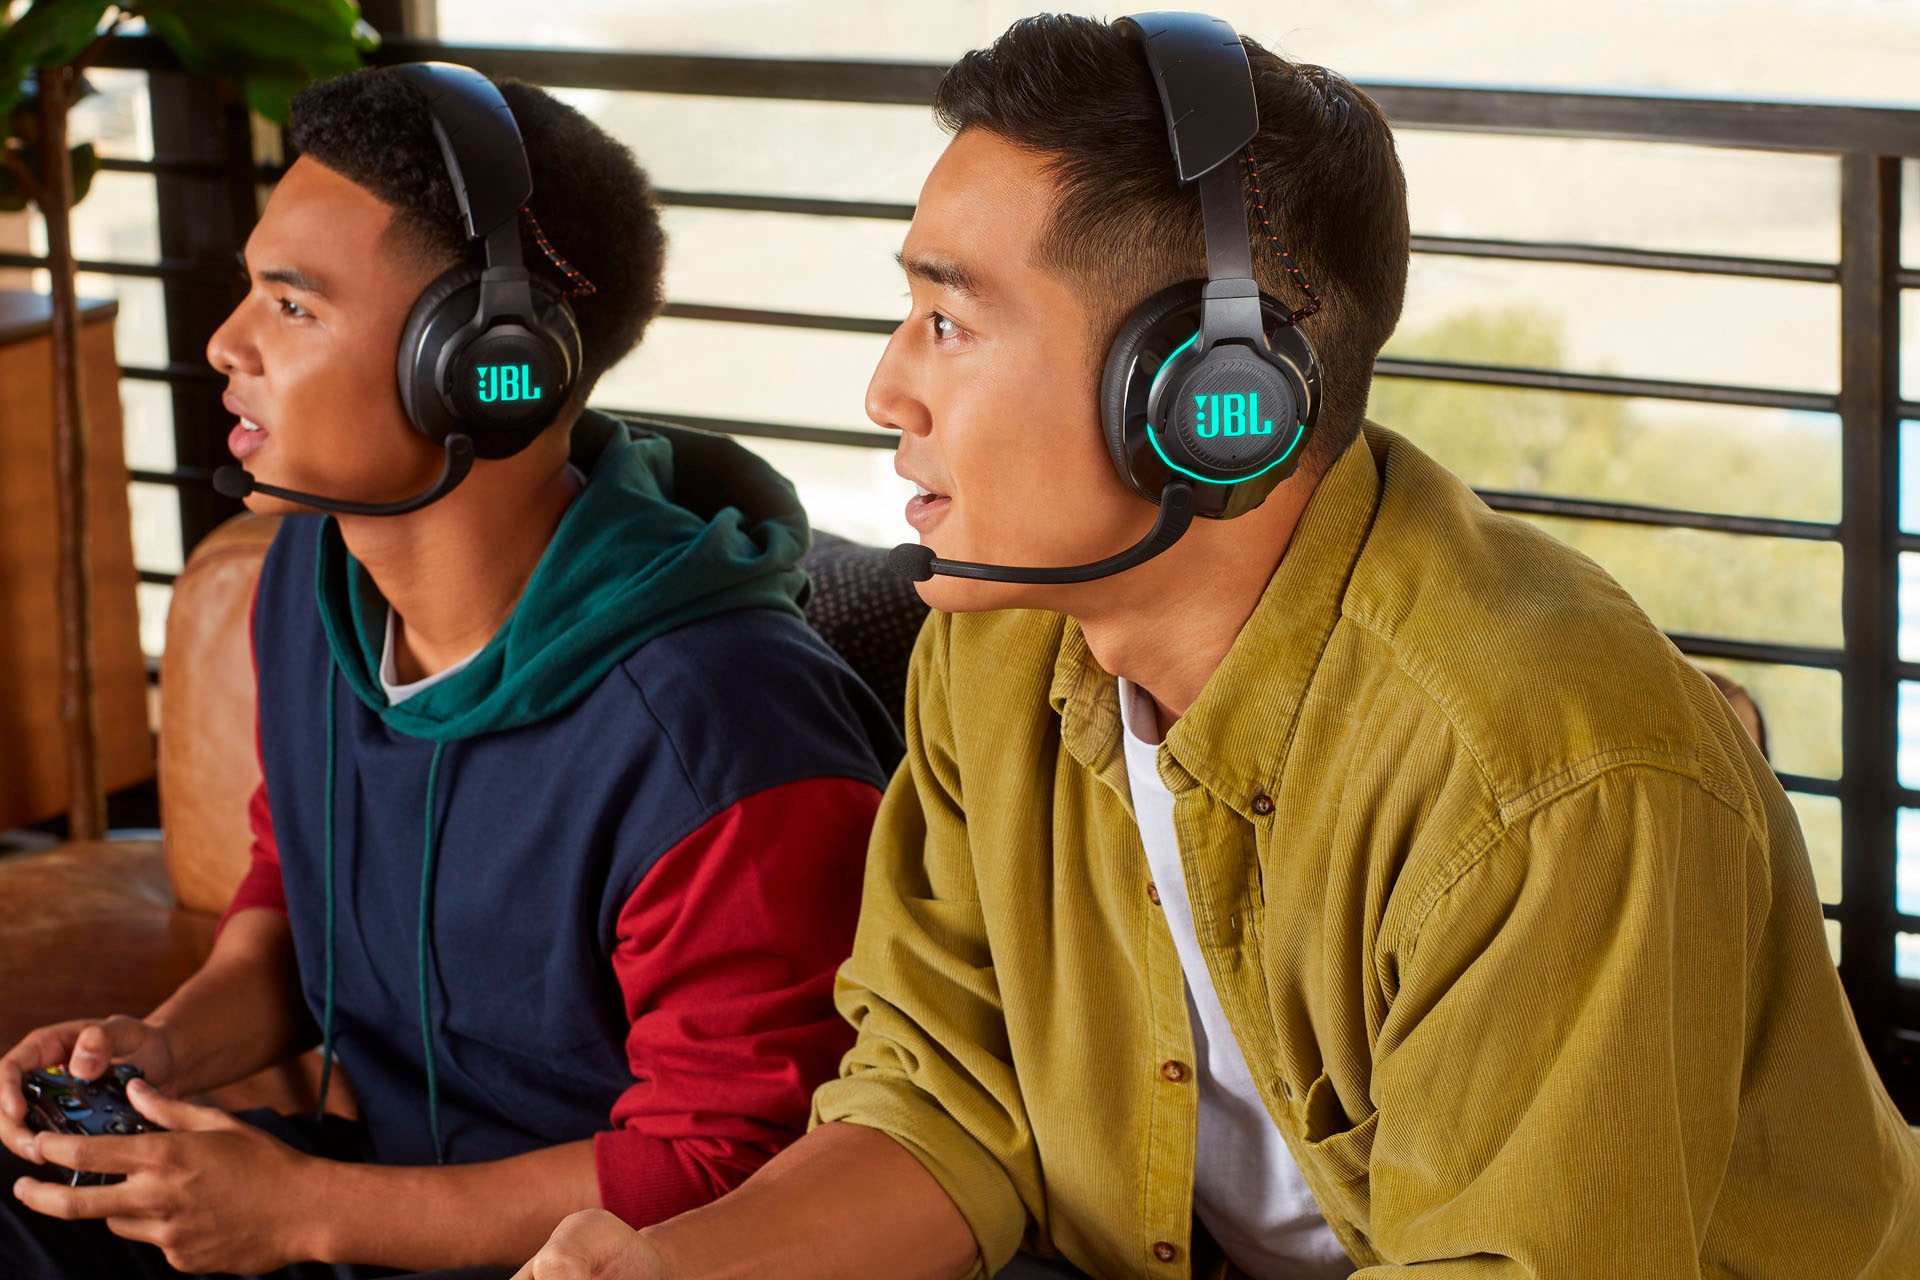 JBL Gaming-Headset »Quantum 810«, Bluetooth-WLAN (WiFi), Active Noise Cancelling (ANC)-Geräuschisolierung